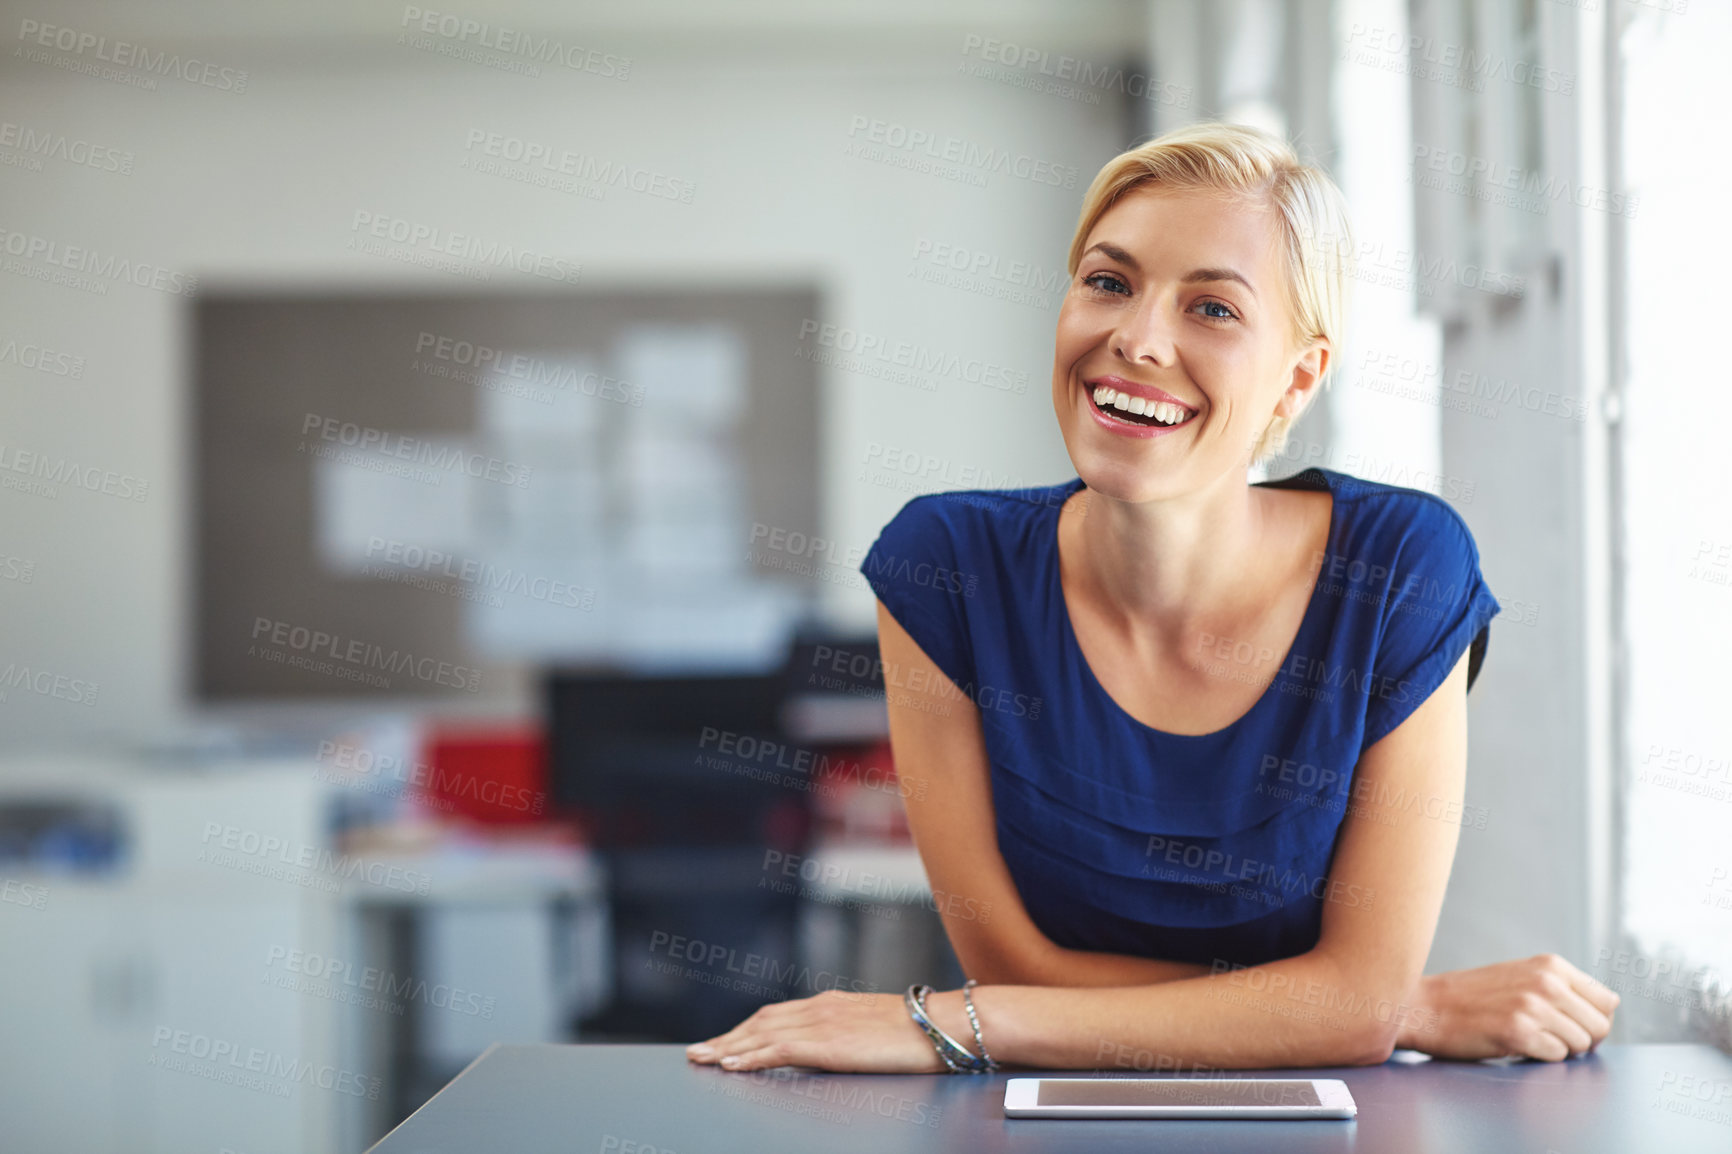 Buy stock photo Cropped portrait of a young businesswoman working on her tablet in the office